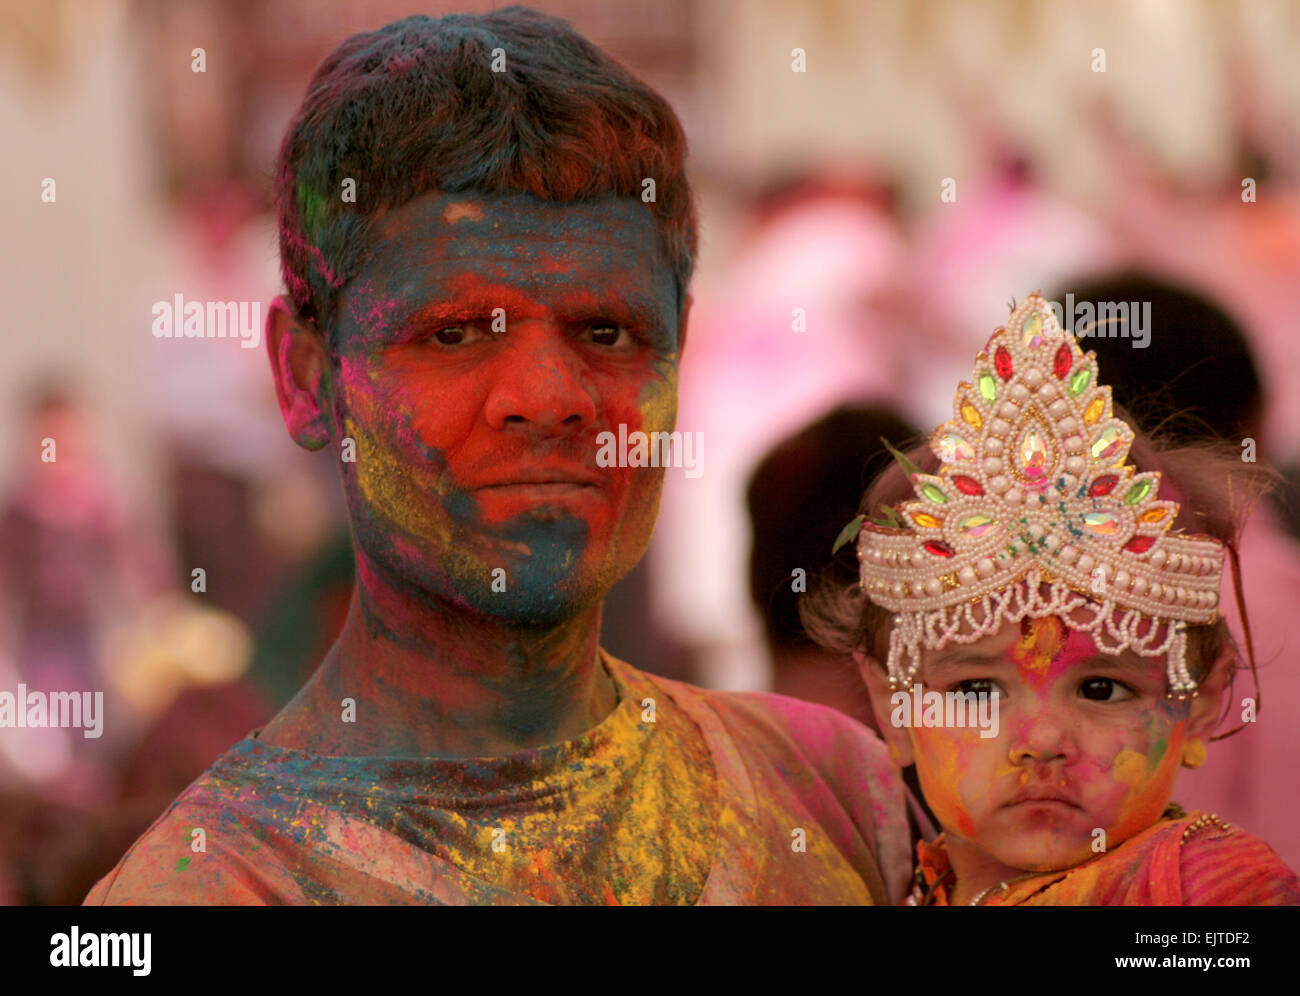 Indian Hindu celebrate Holi,festival of colors,annual festival on March 6,2015 in Hyderabad,India.Popular festival for Hindus. Stock Photo